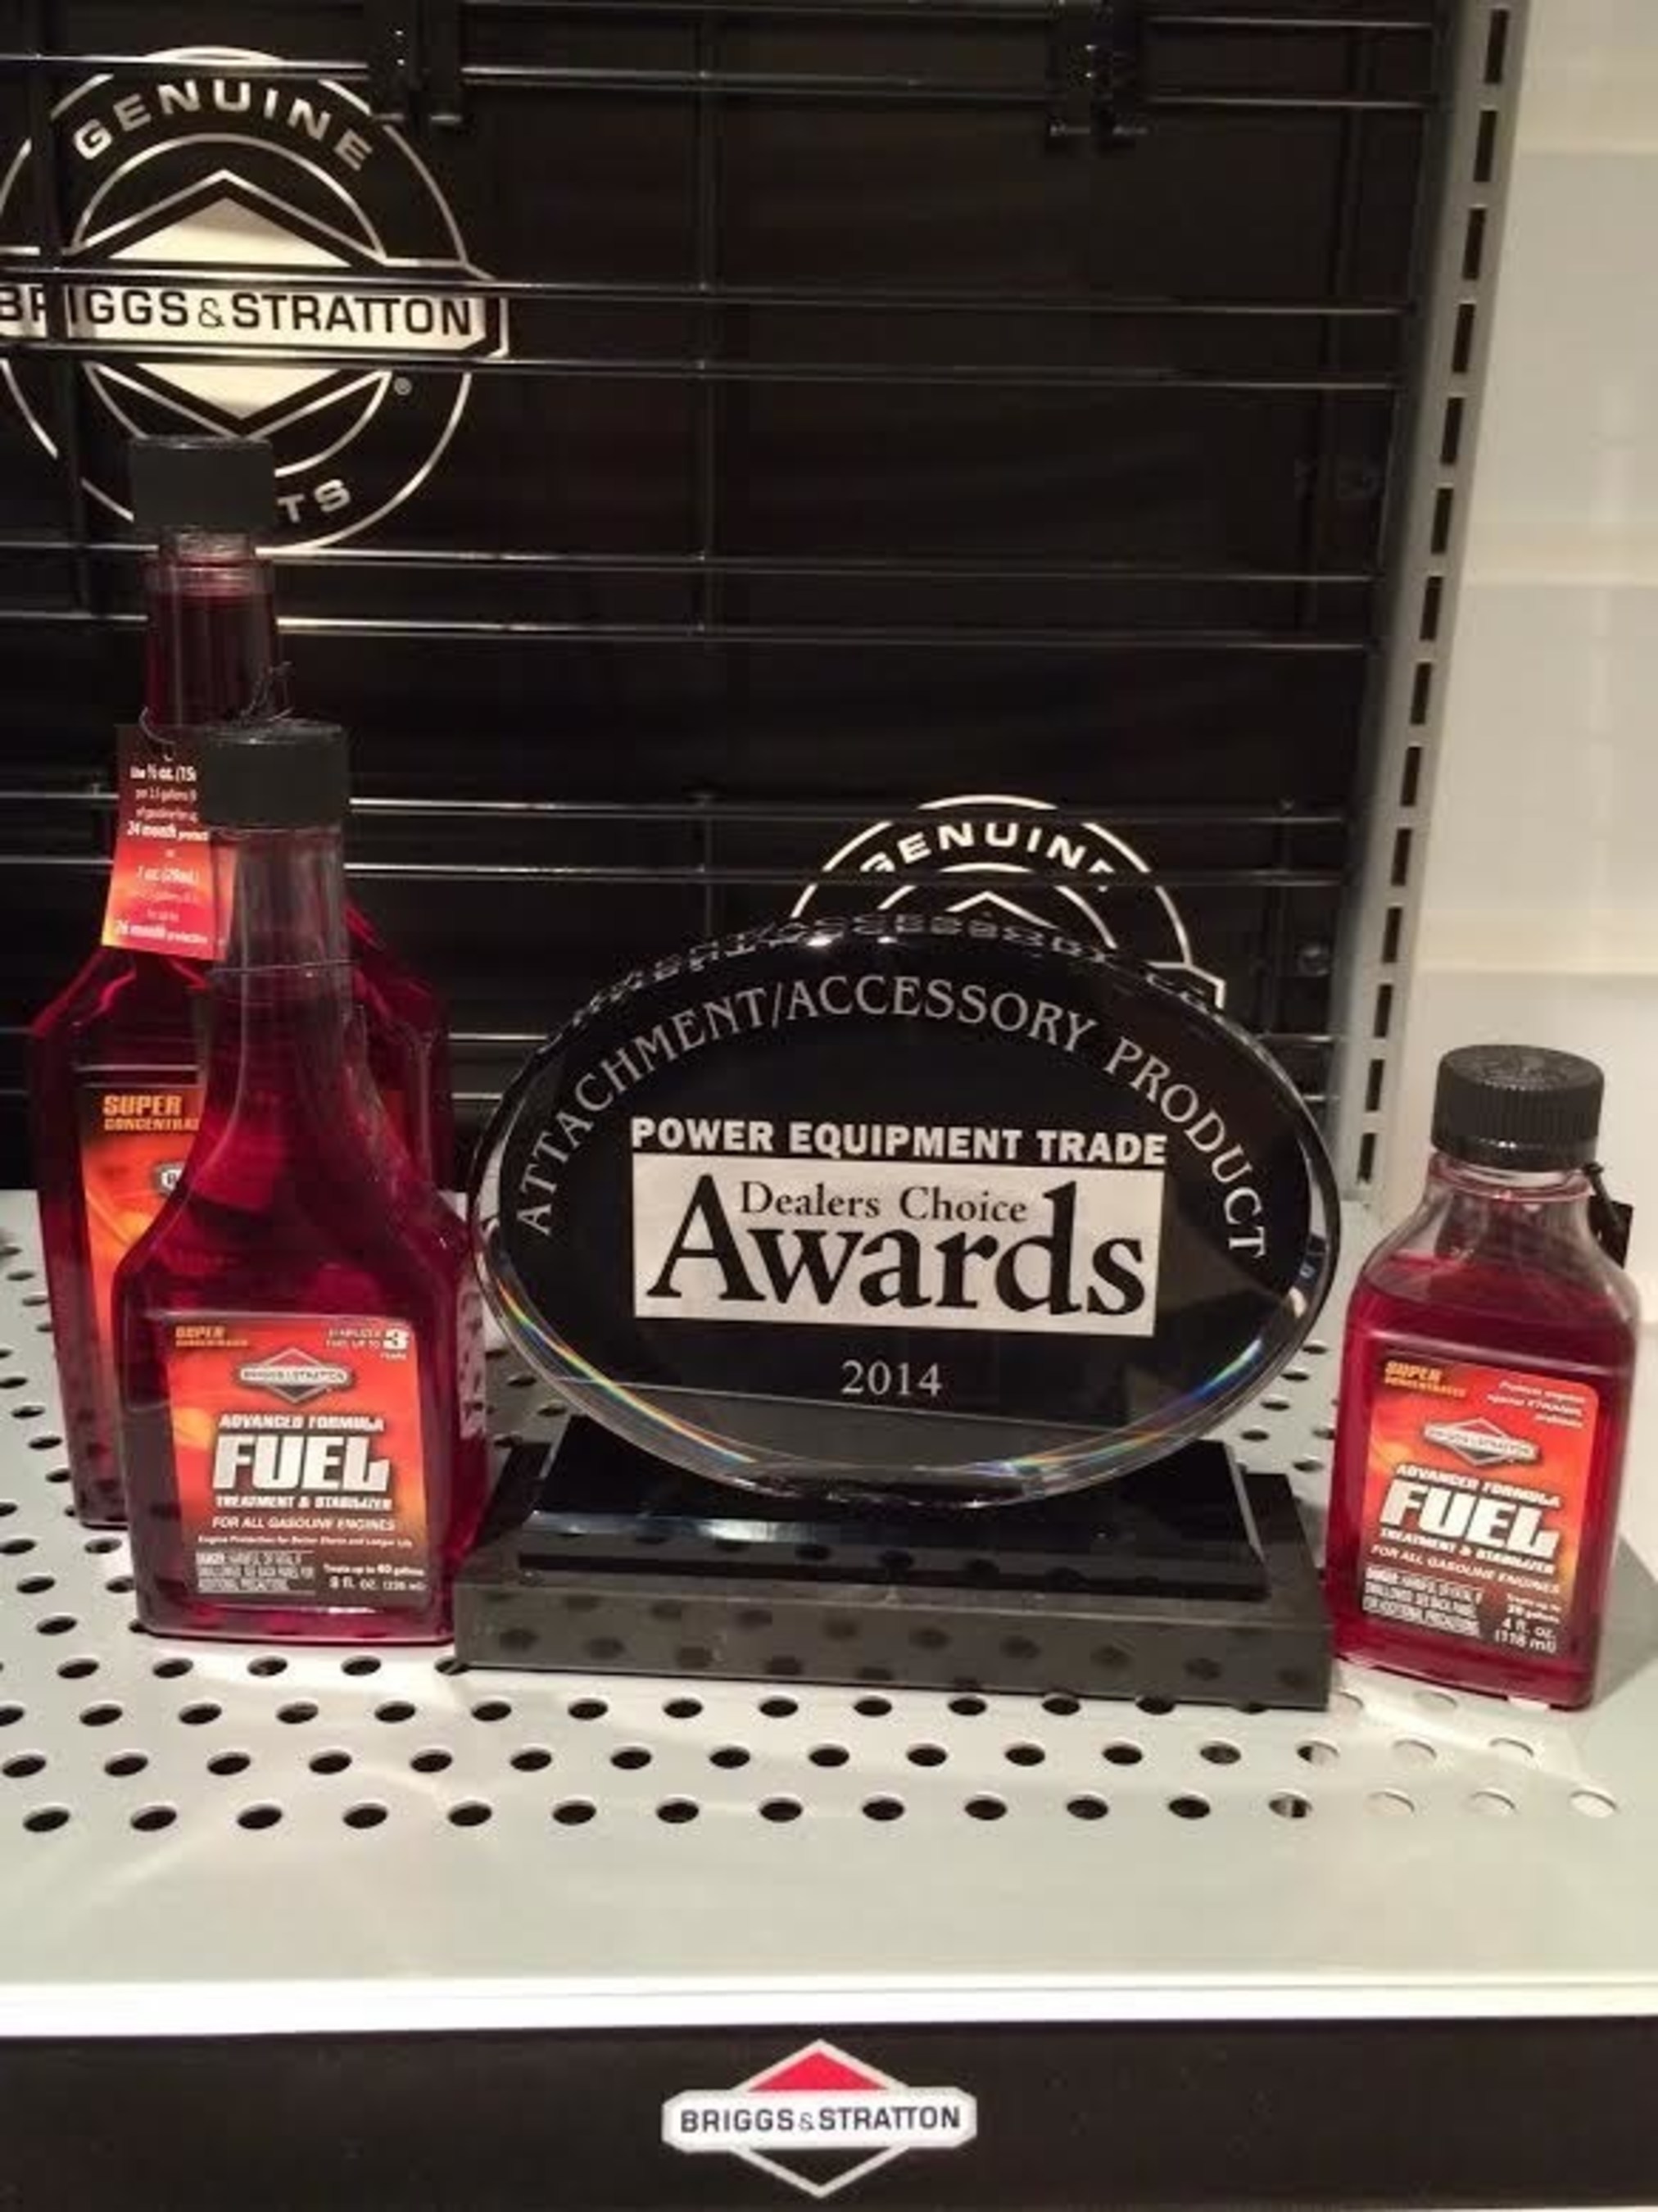 Advanced Fuel Treatment by Briggs & Stratton (NYSE: BGG) wins a Dealers' Choice Award at GIE EXPO